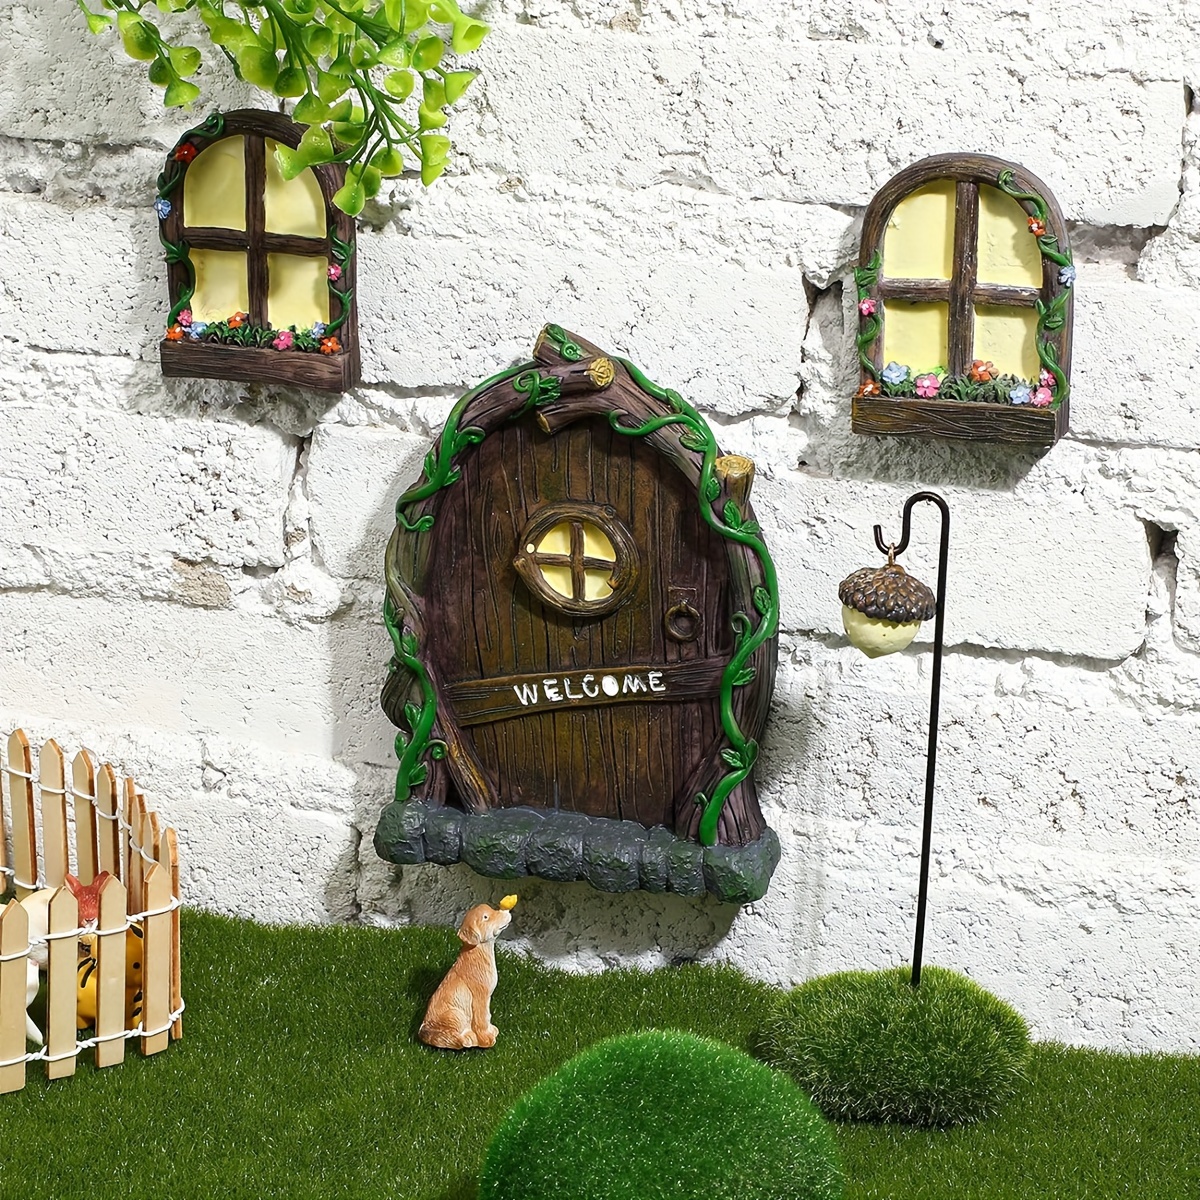 

1set Resin Miniature Fairy Dwarfs Home Windows And Welcome Doors With Fairy Lanterns, Glow-in-the Dark Courtyard Art Sculptures To Decorate Rooms, Walls And Trees Outdoor Decorative Accessories